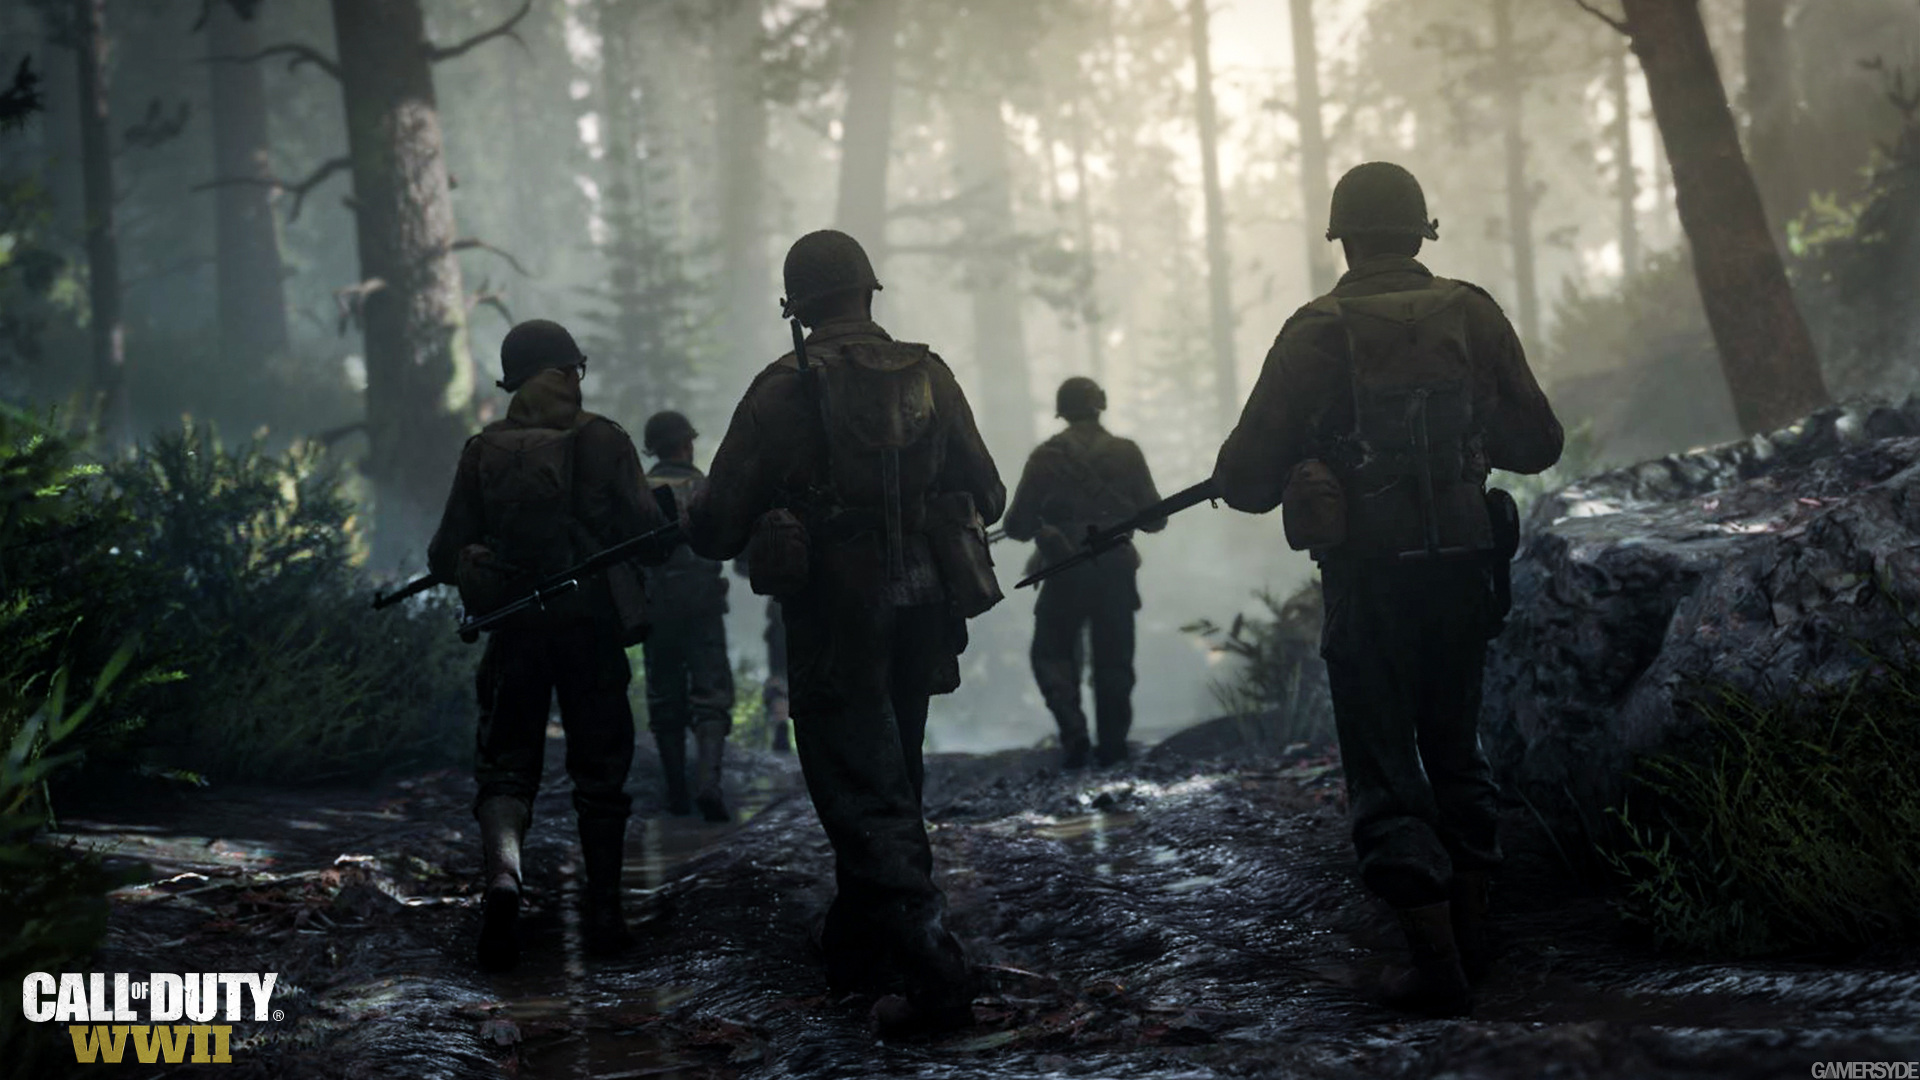 image_call_of_duty_wwii-35209-3843_0005.jpg